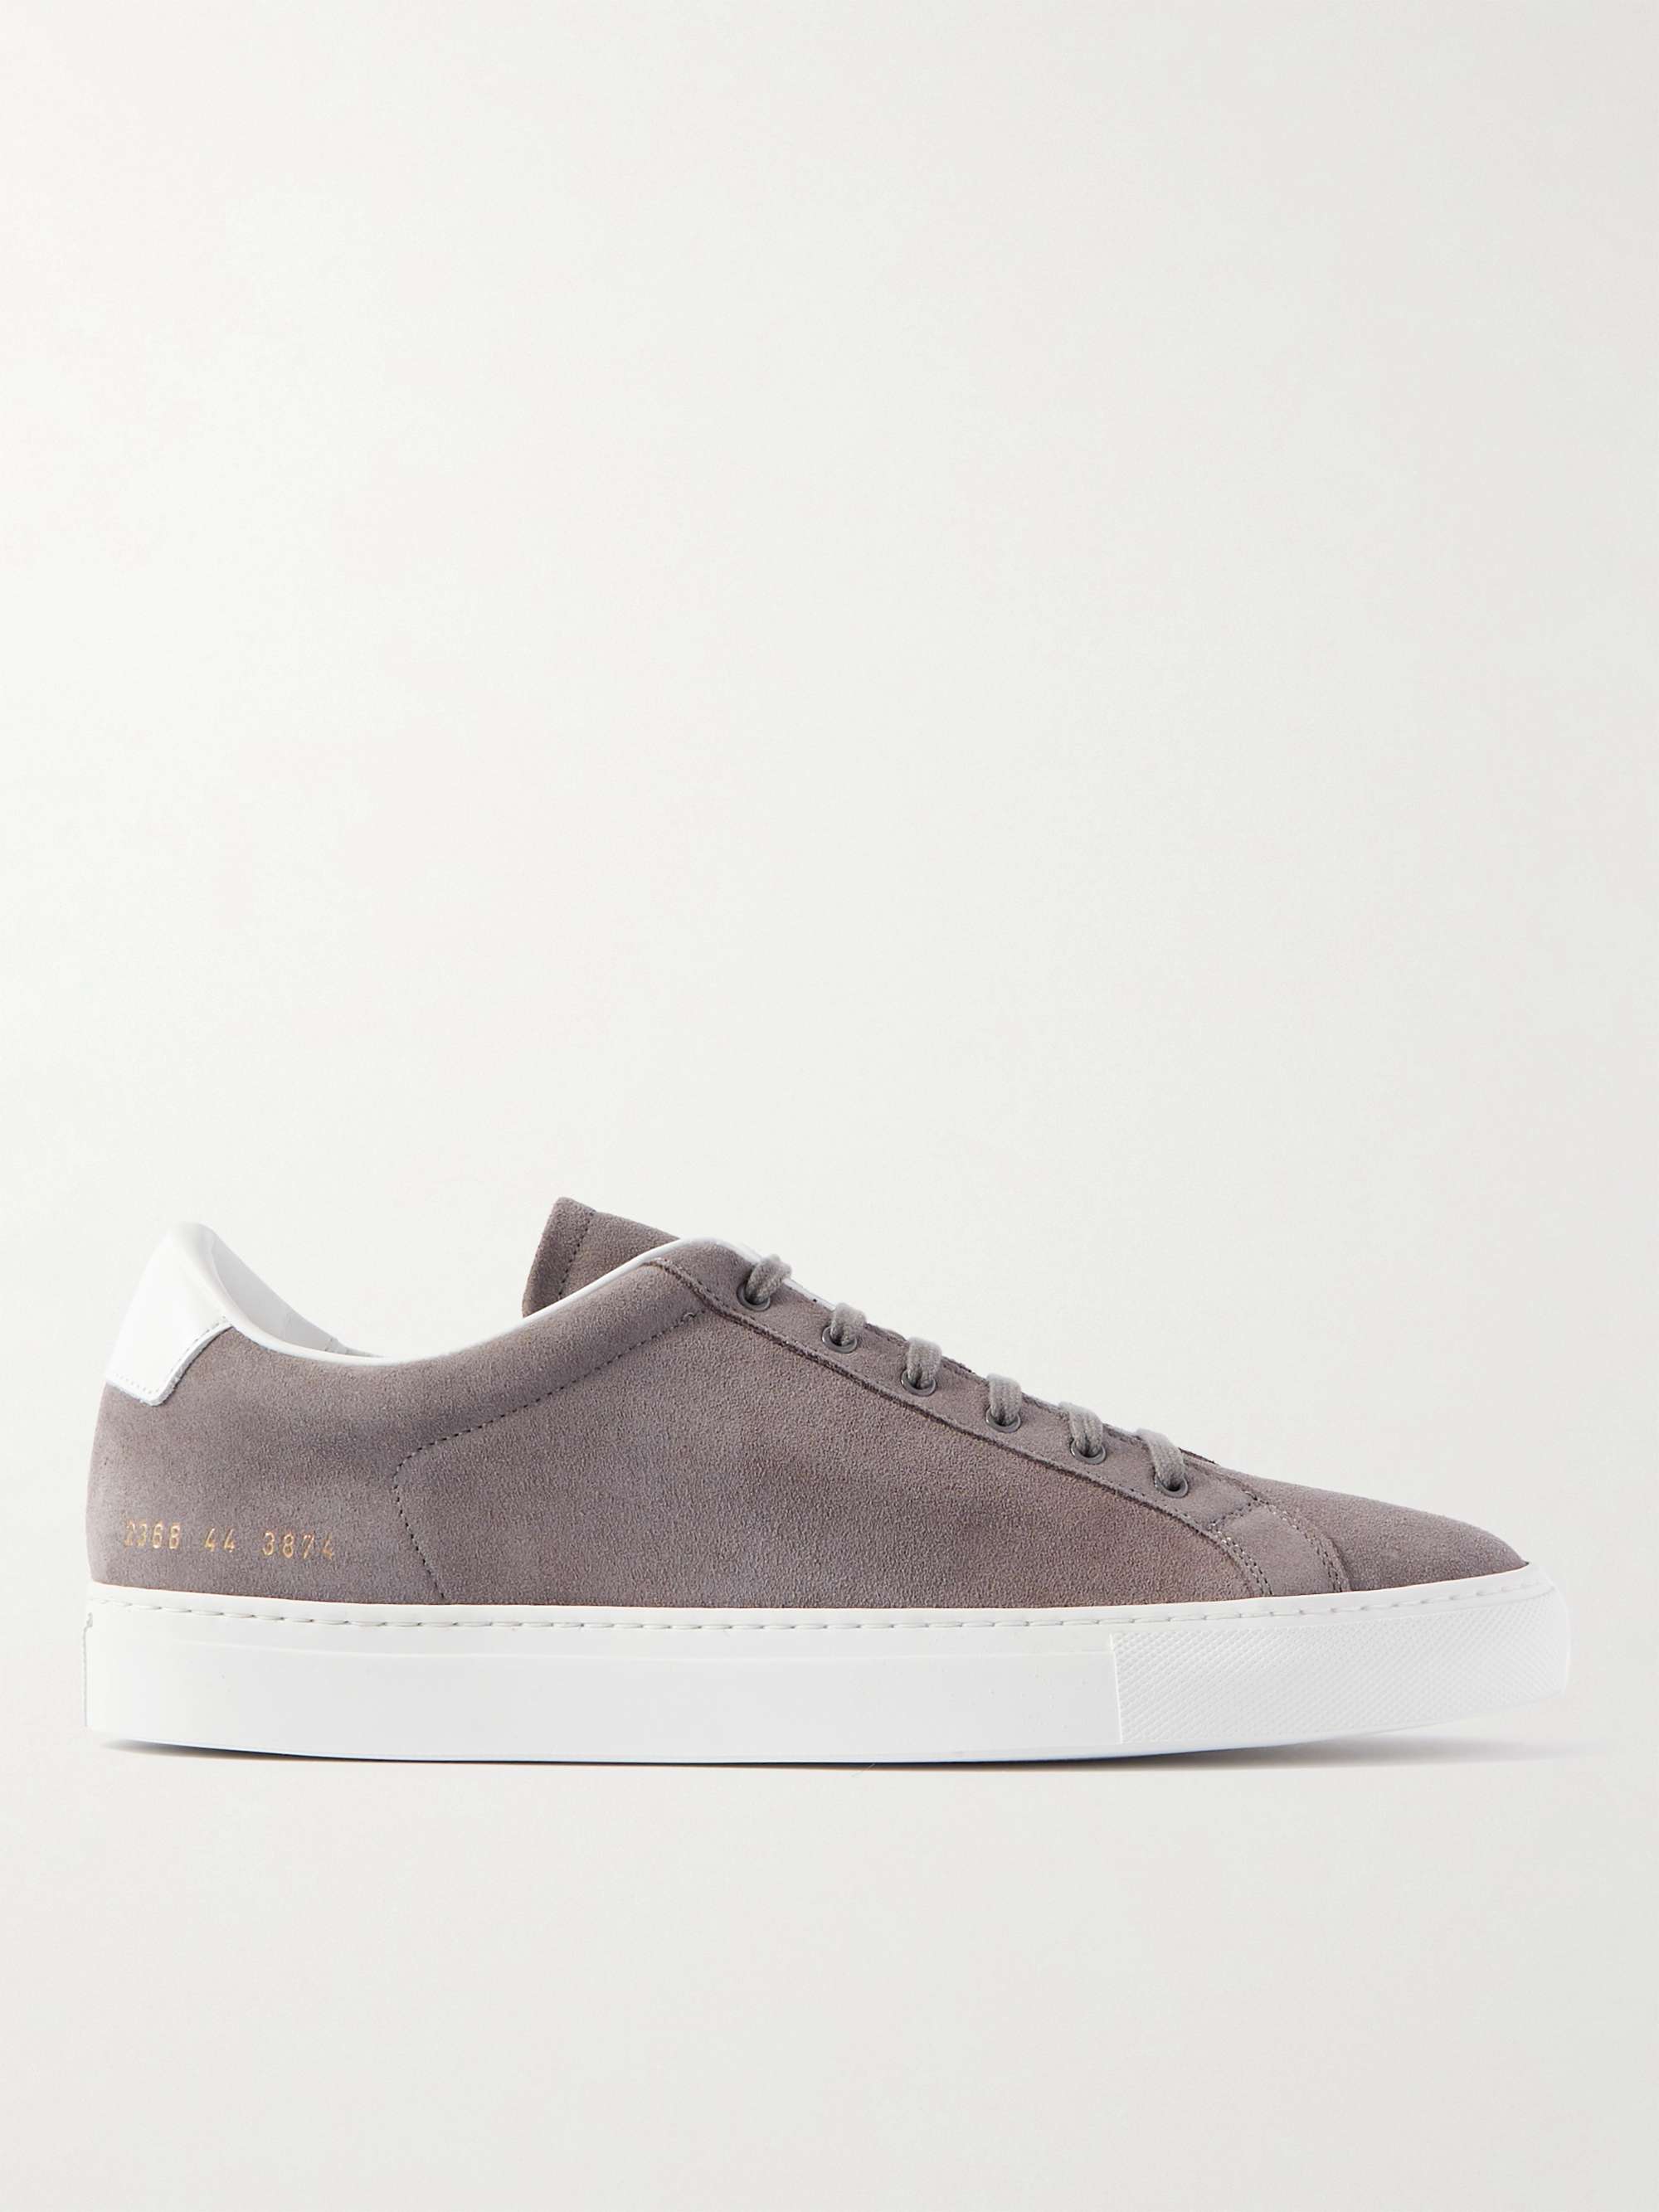 COMMON PROJECTS Retro Low Leather-Trimmed Suede Sneakers | MR PORTER